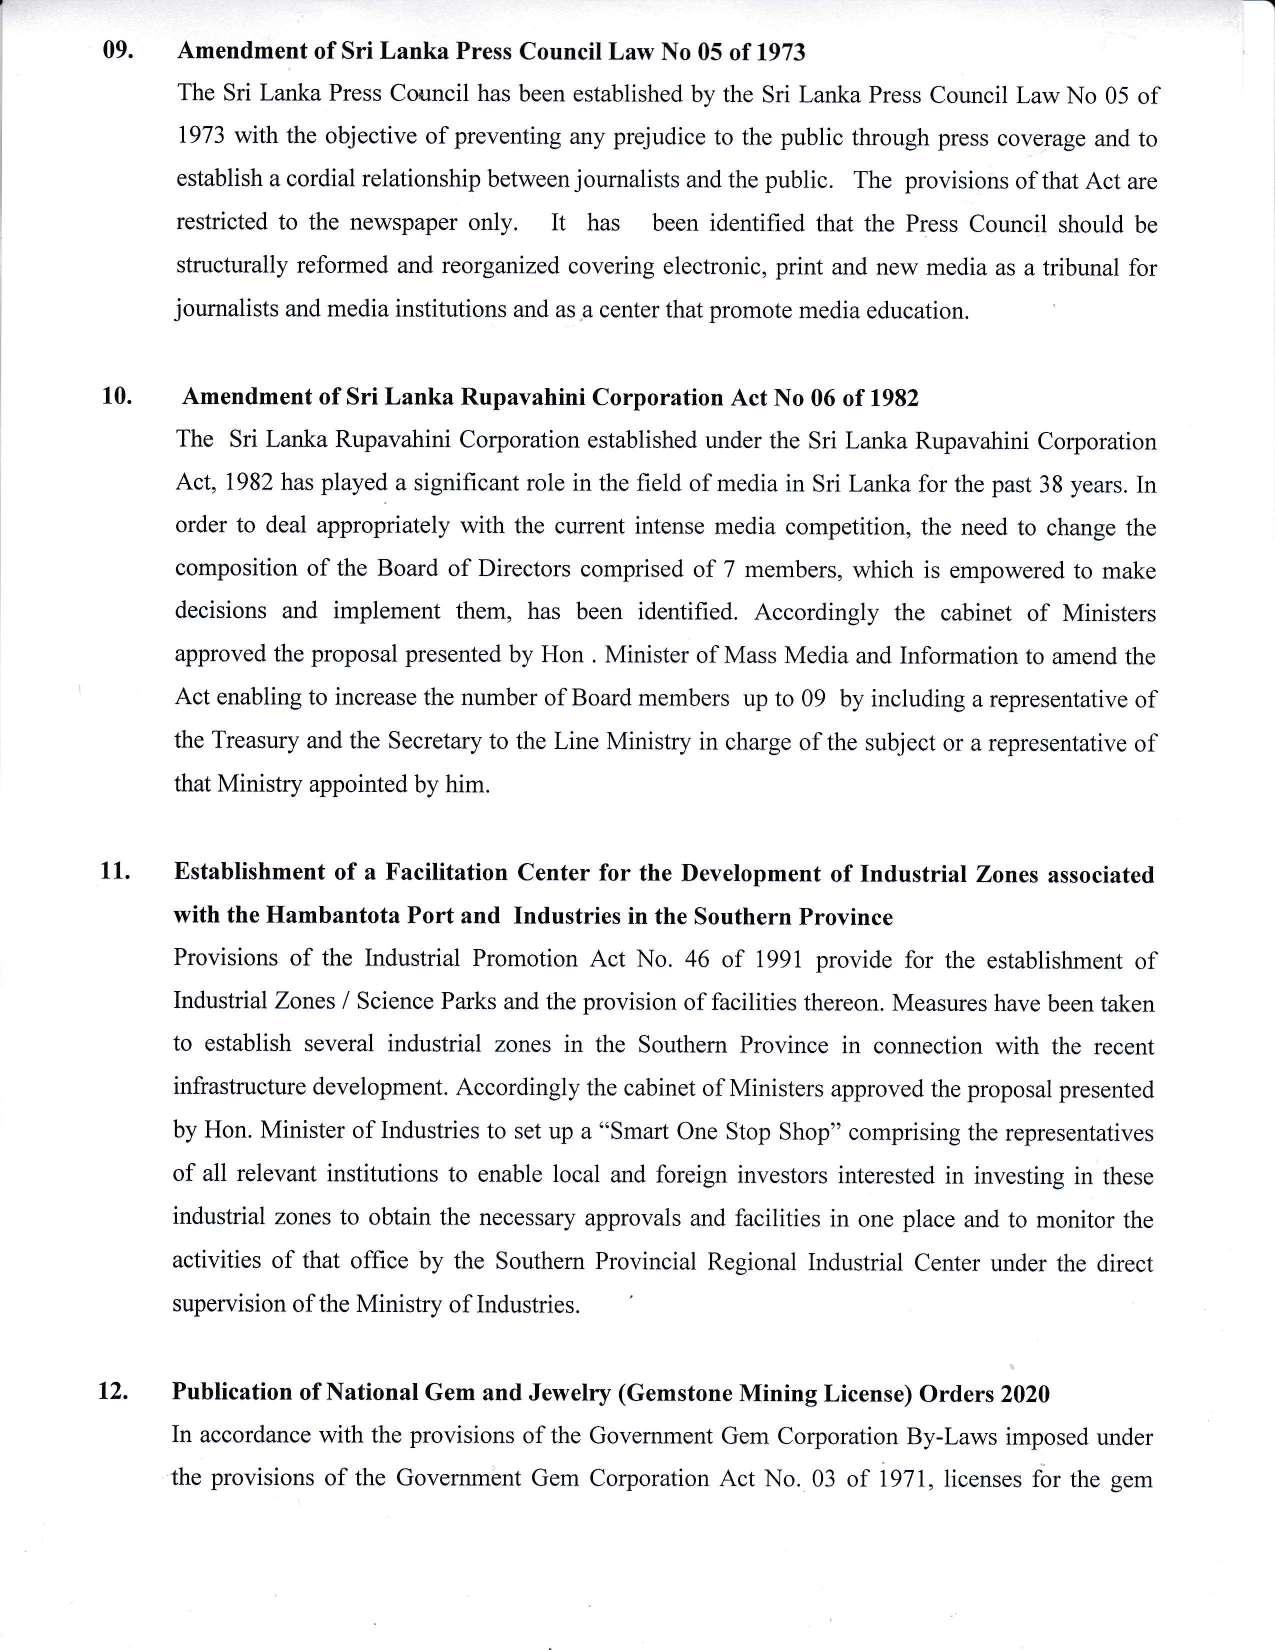 Cabinet Decision on 04.01.2020 English page 004